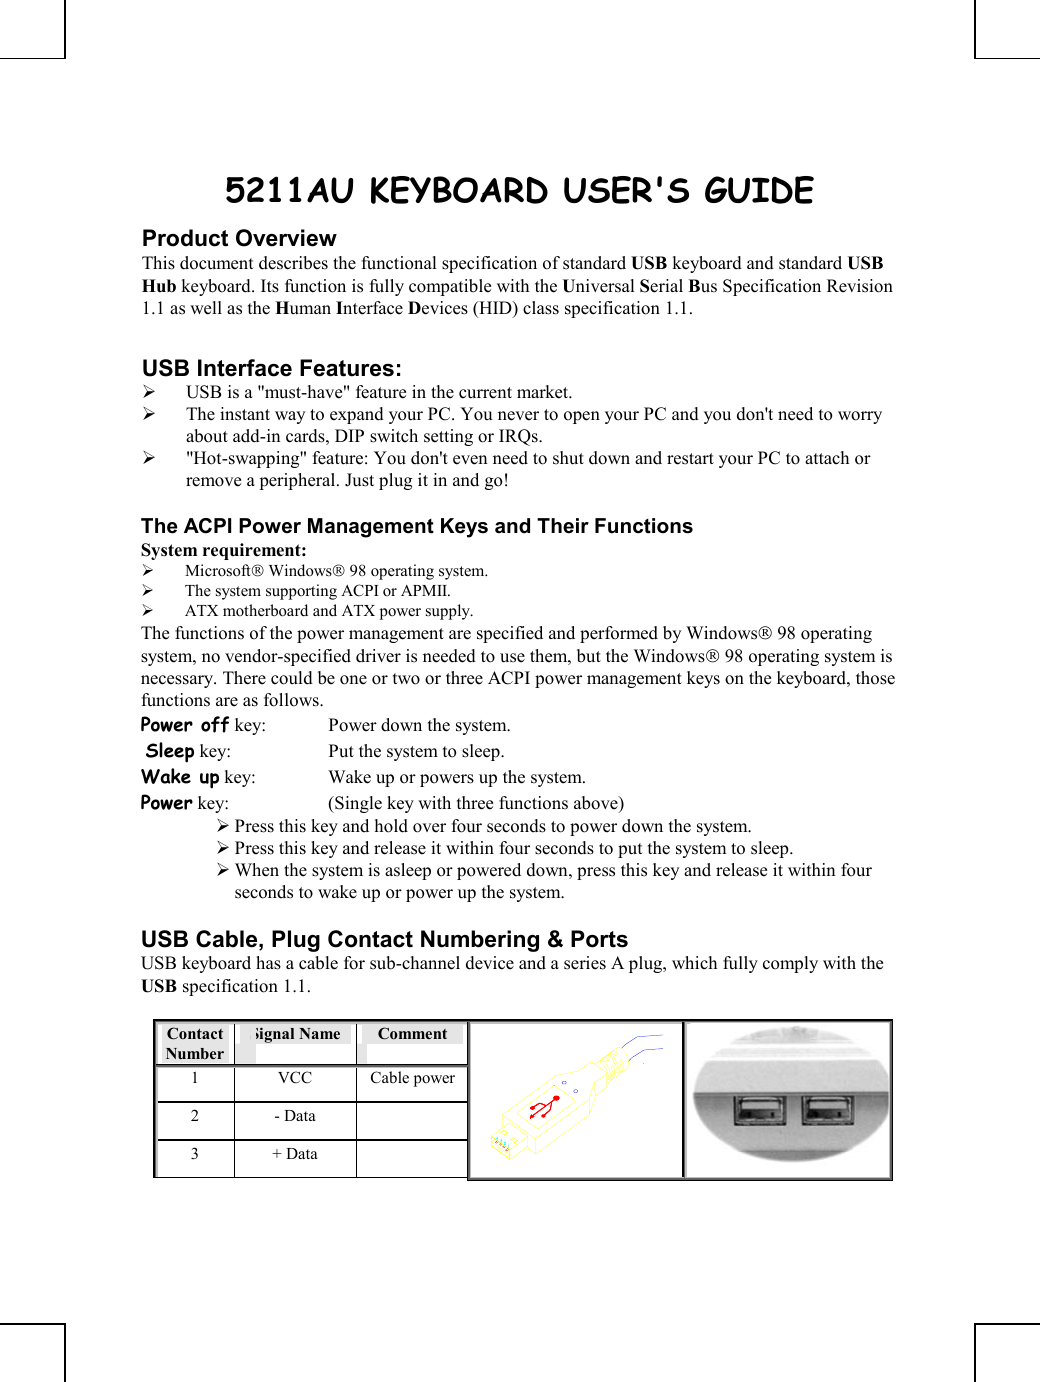       5211AU KEYBOARD USER&apos;S GUIDE Product Overview This document describes the functional specification of standard USB keyboard and standard USB Hub keyboard. Its function is fully compatible with the Universal Serial Bus Specification Revision 1.1 as well as the Human Interface Devices (HID) class specification 1.1.  USB Interface Features:   USB is a &quot;must-have&quot; feature in the current market.   The instant way to expand your PC. You never to open your PC and you don&apos;t need to worry about add-in cards, DIP switch setting or IRQs.   &quot;Hot-swapping&quot; feature: You don&apos;t even need to shut down and restart your PC to attach or remove a peripheral. Just plug it in and go!  The ACPI Power Management Keys and Their Functions System requirement:    Microsoft Windows 98 operating system.   The system supporting ACPI or APMII.   ATX motherboard and ATX power supply. The functions of the power management are specified and performed by Windows 98 operating system, no vendor-specified driver is needed to use them, but the Windows 98 operating system is necessary. There could be one or two or three ACPI power management keys on the keyboard, those functions are as follows. Power off key:  Power down the system.  Sleep key:  Put the system to sleep.  Wake up key:  Wake up or powers up the system.  Power key:  (Single key with three functions above)       Press this key and hold over four seconds to power down the system.  Press this key and release it within four seconds to put the system to sleep.  When the system is asleep or powered down, press this key and release it within four seconds to wake up or power up the system.  USB Cable, Plug Contact Numbering &amp; Ports USB keyboard has a cable for sub-channel device and a series A plug, which fully comply with the USB specification 1.1.  Contact Number Signal Name   Comment 1 VCC Cable power2 - Data   3 + Data    